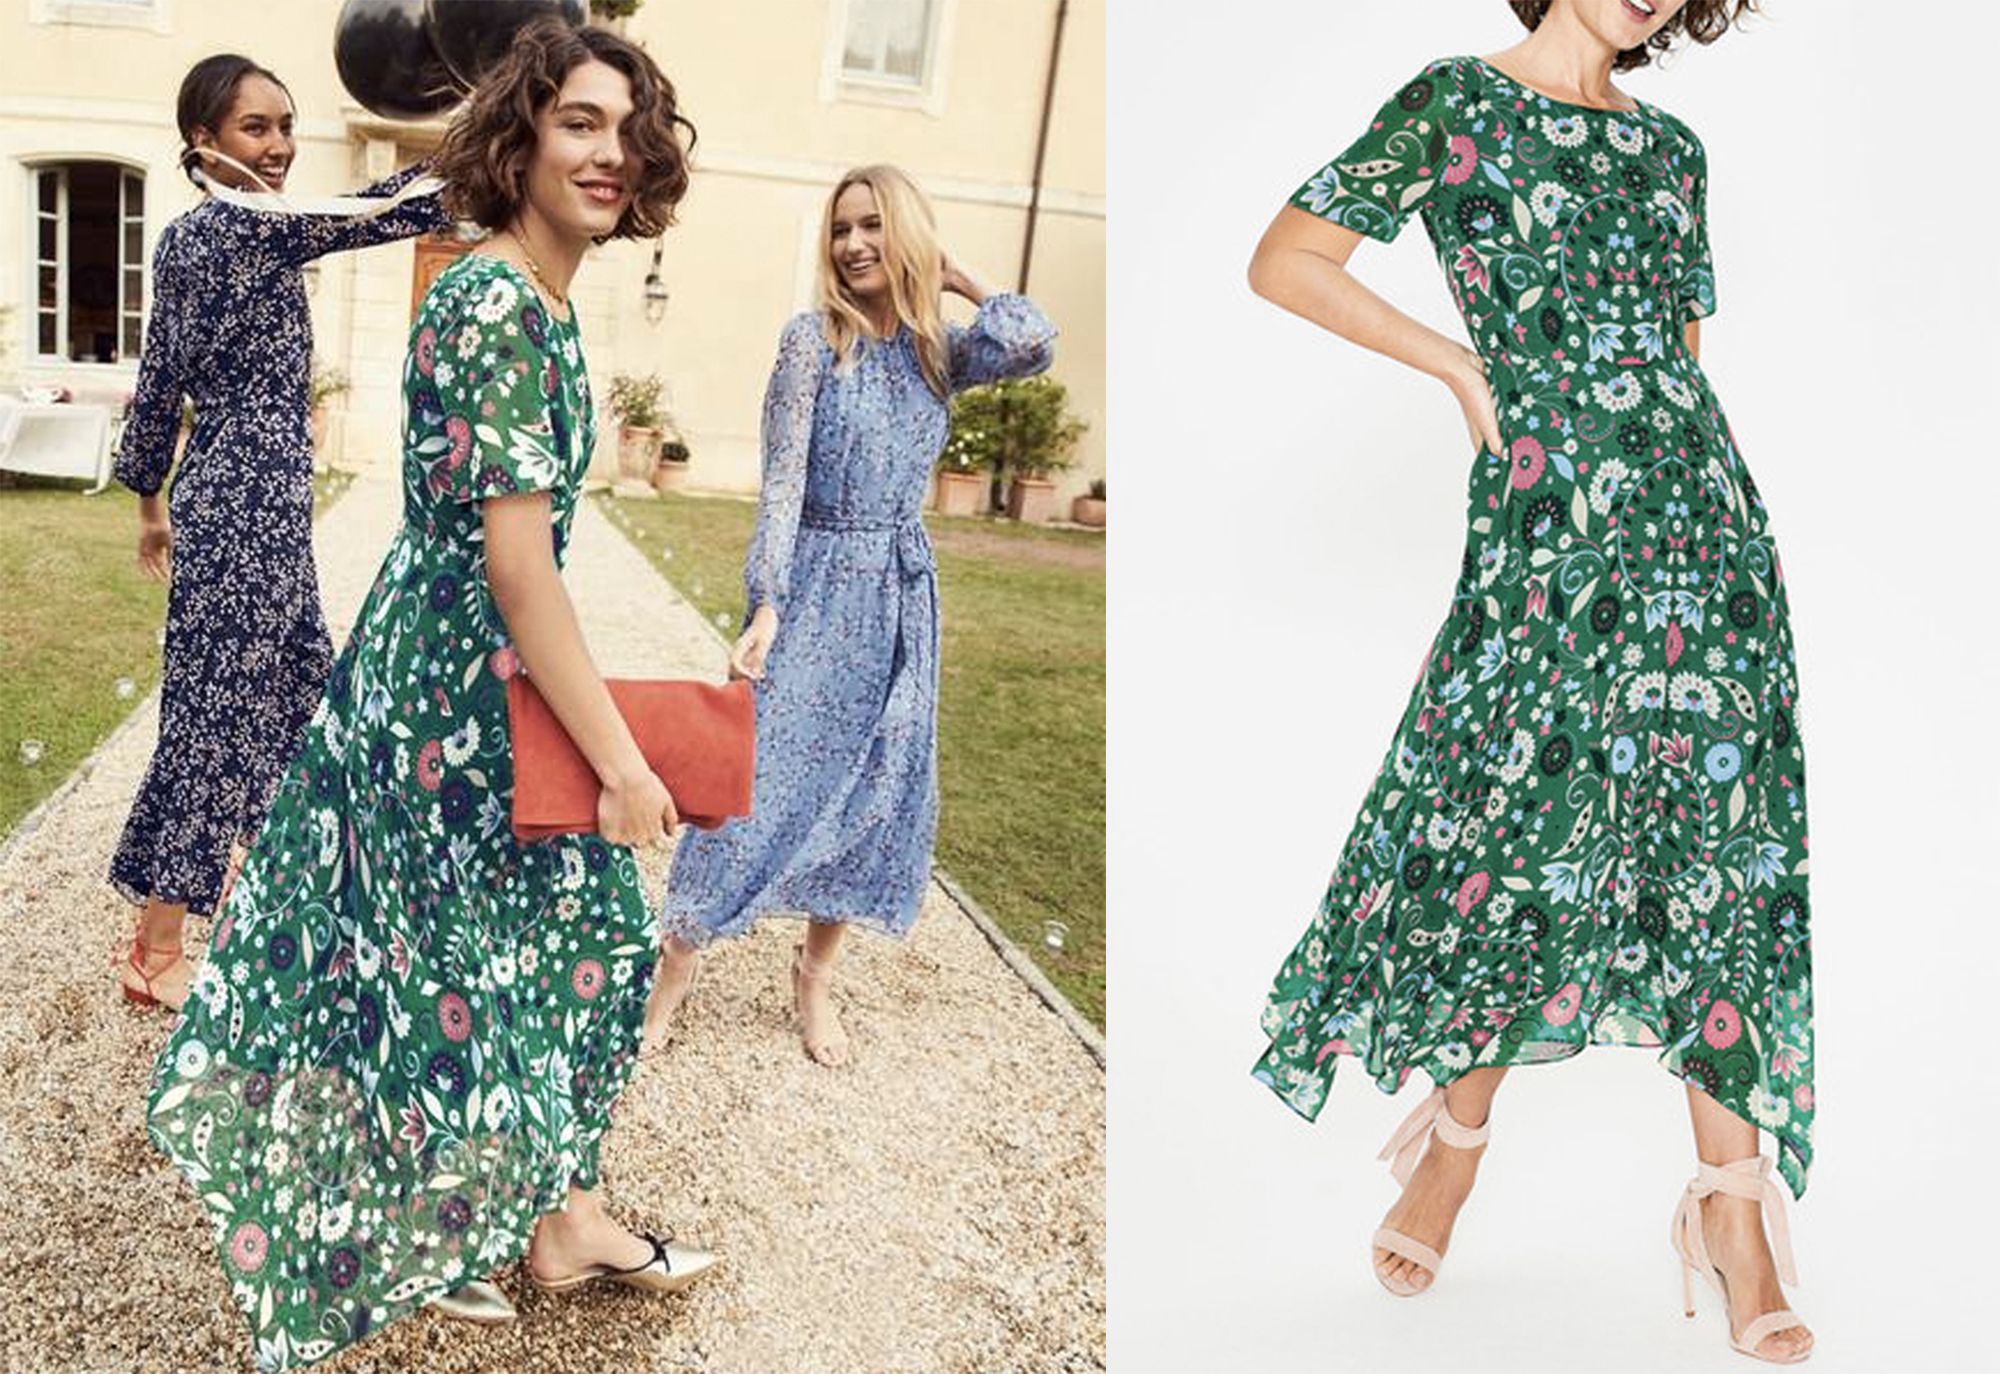 The most stylish Boden dresses for party season